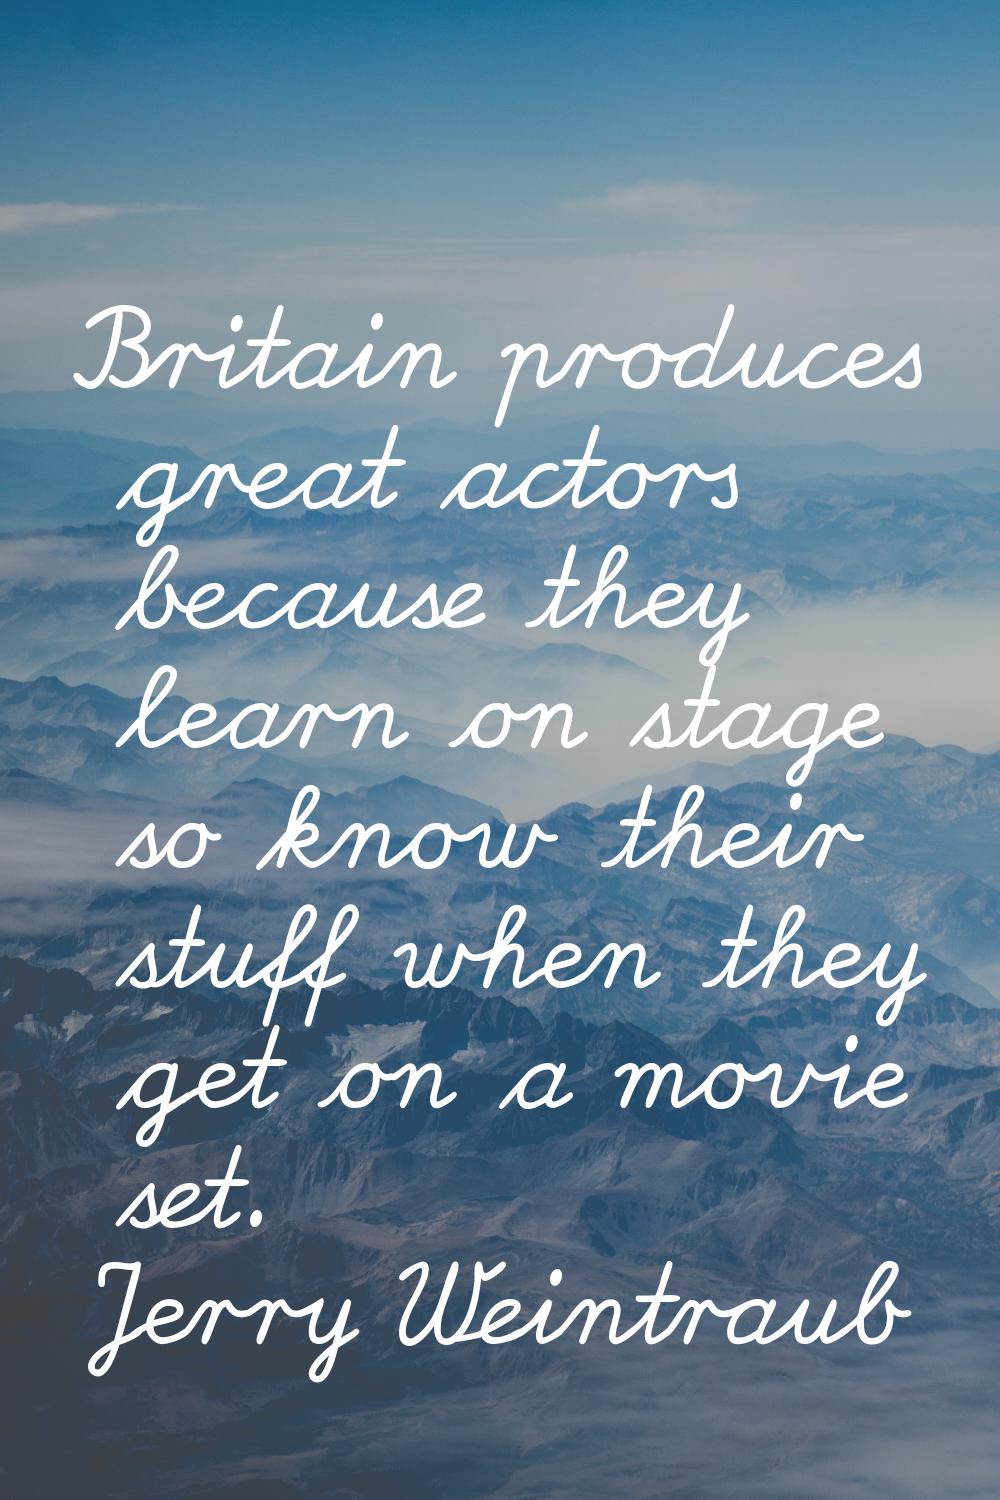 Britain produces great actors because they learn on stage so know their stuff when they get on a mo